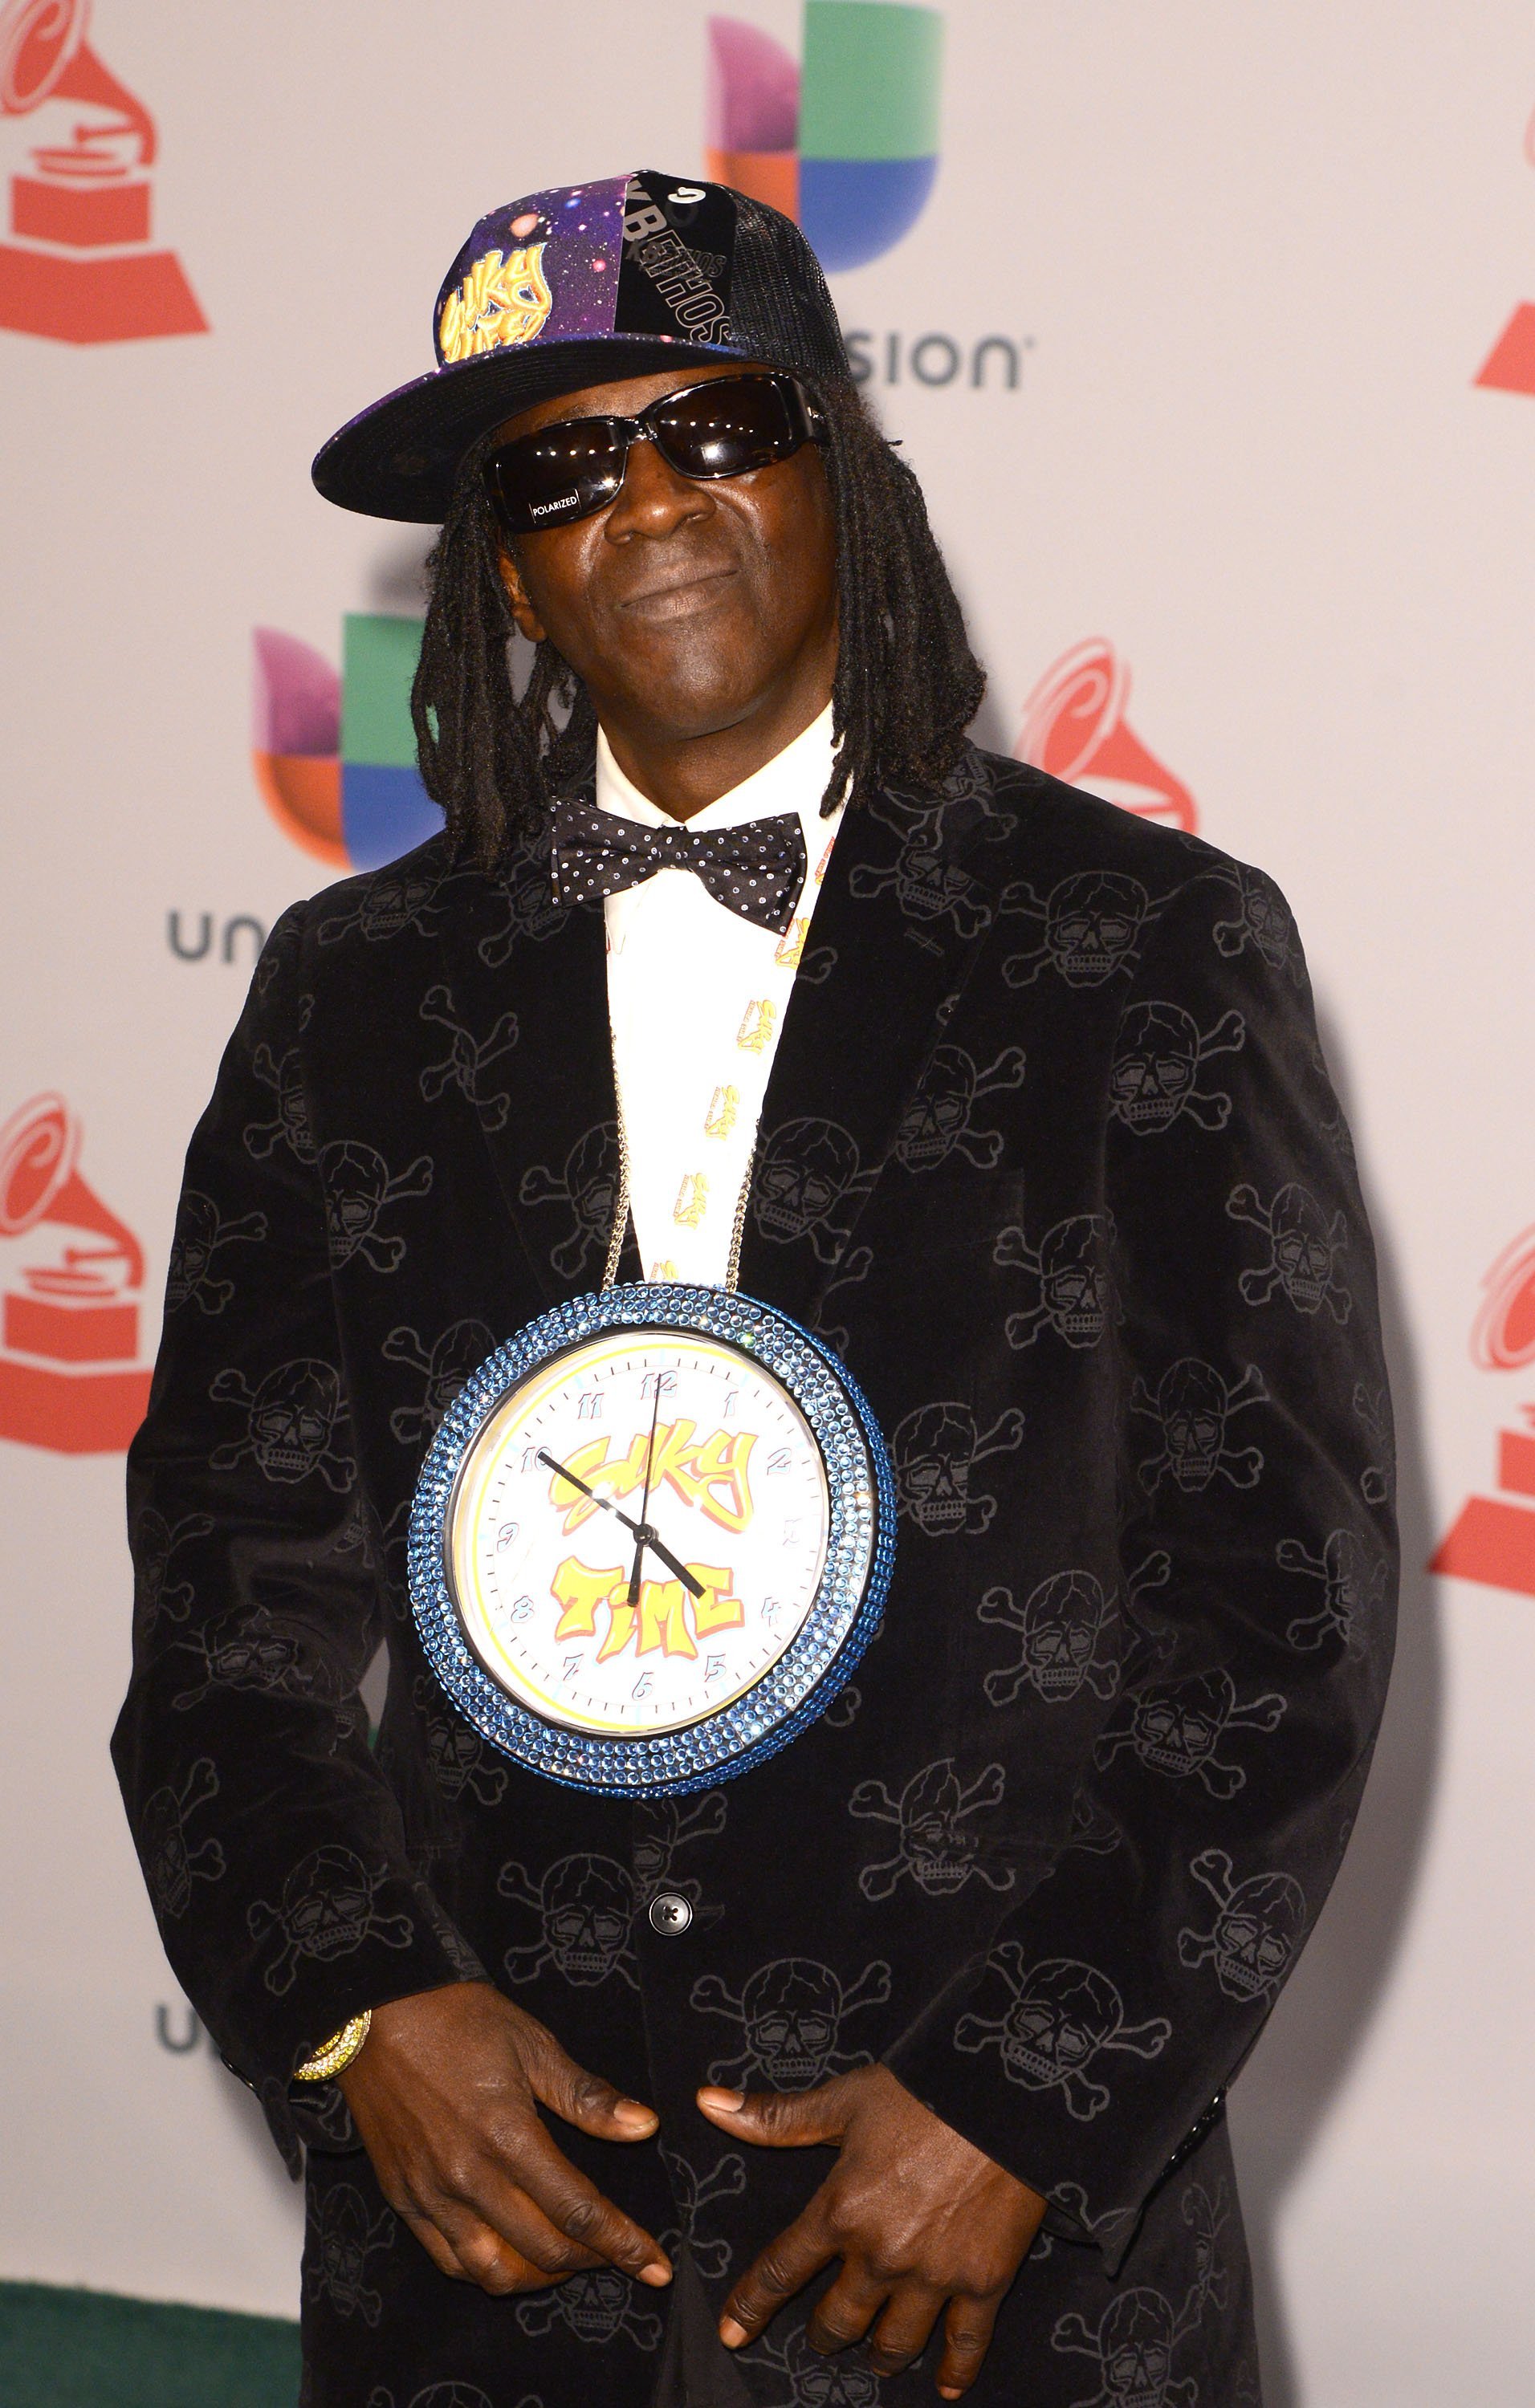 Flavor Flav at the 15th Annual Latin Grammy Awards in 2014. | Photo: Getty Images